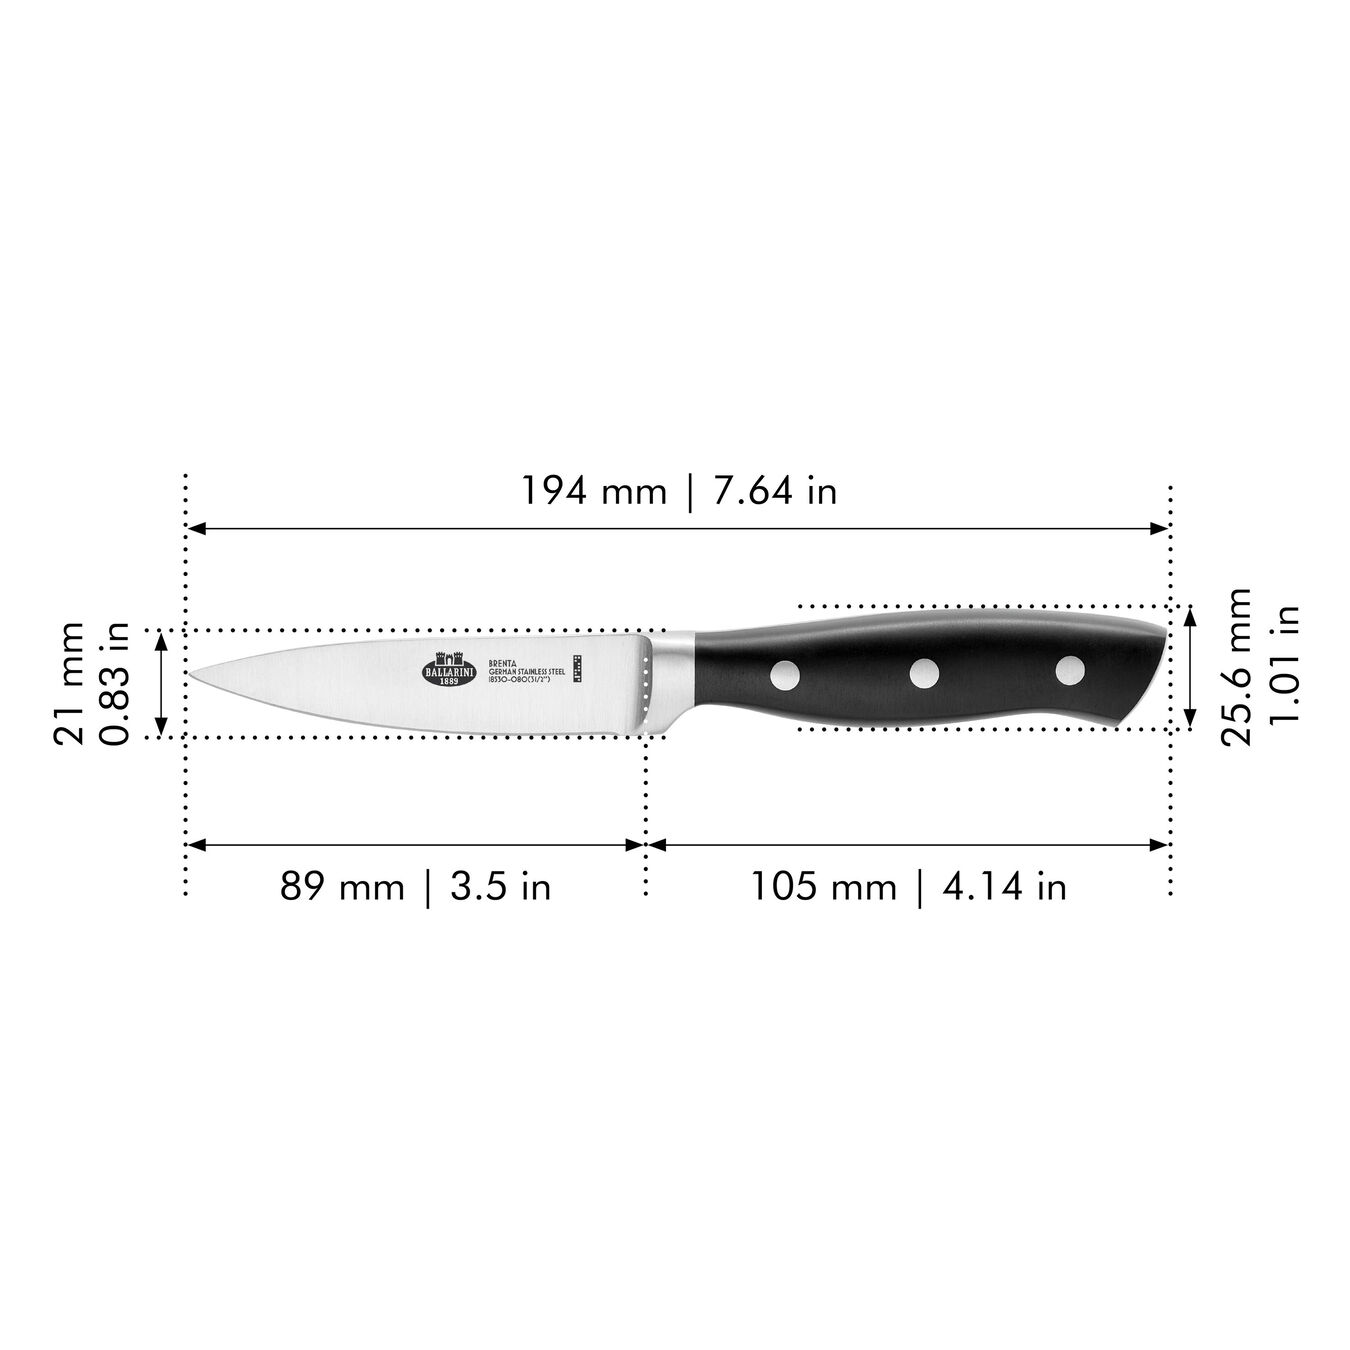 4-inch, Paring knife,,large 3